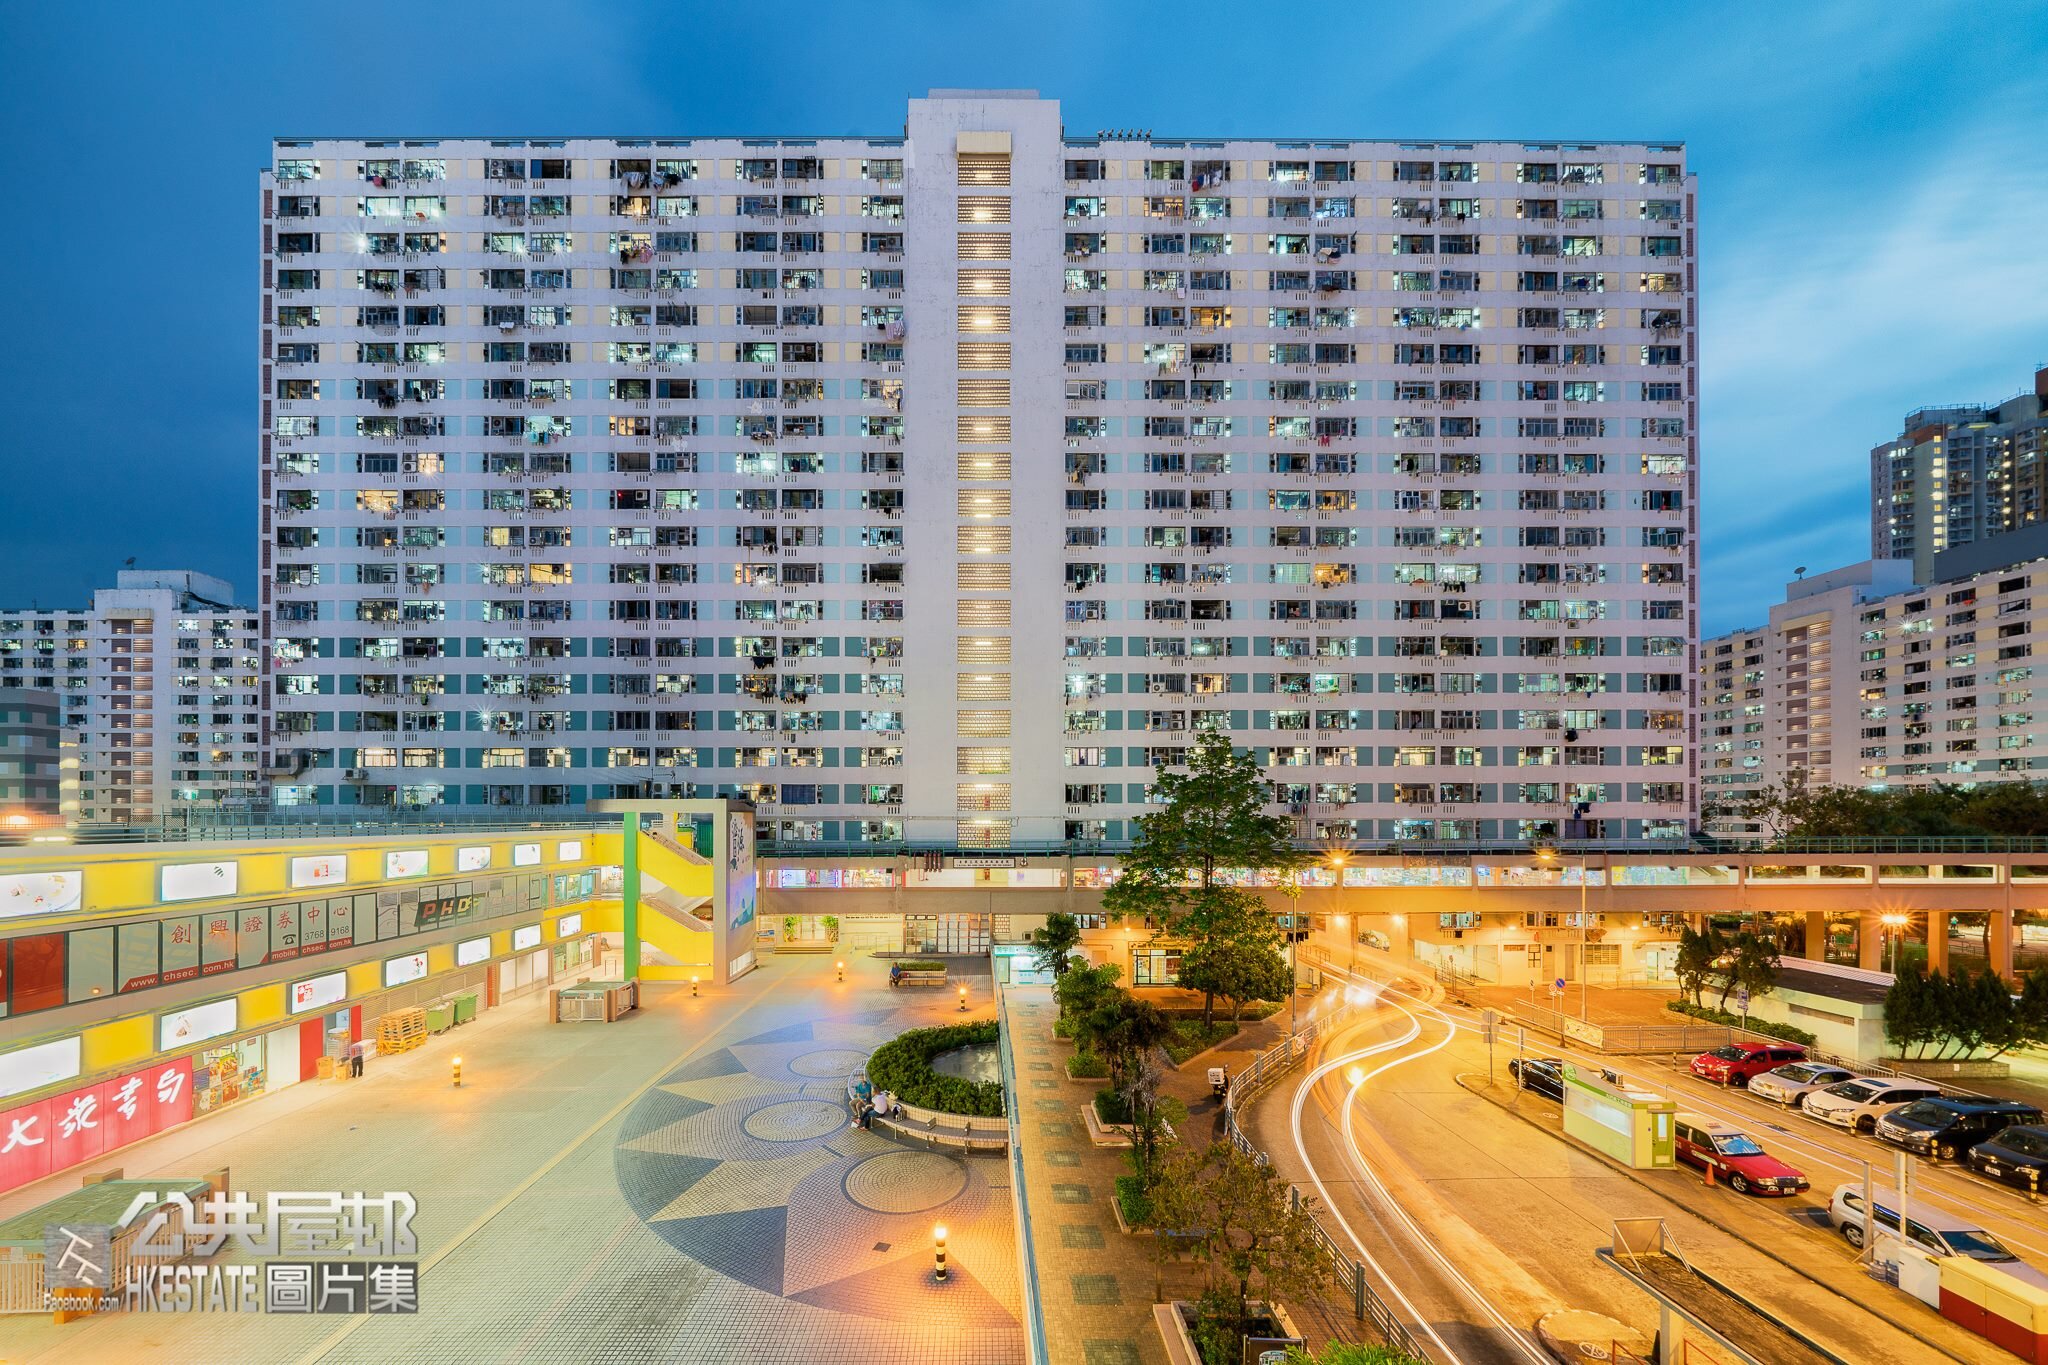 We Are HKers - William Leung | The reality of the community through a public housing photographer’s lens